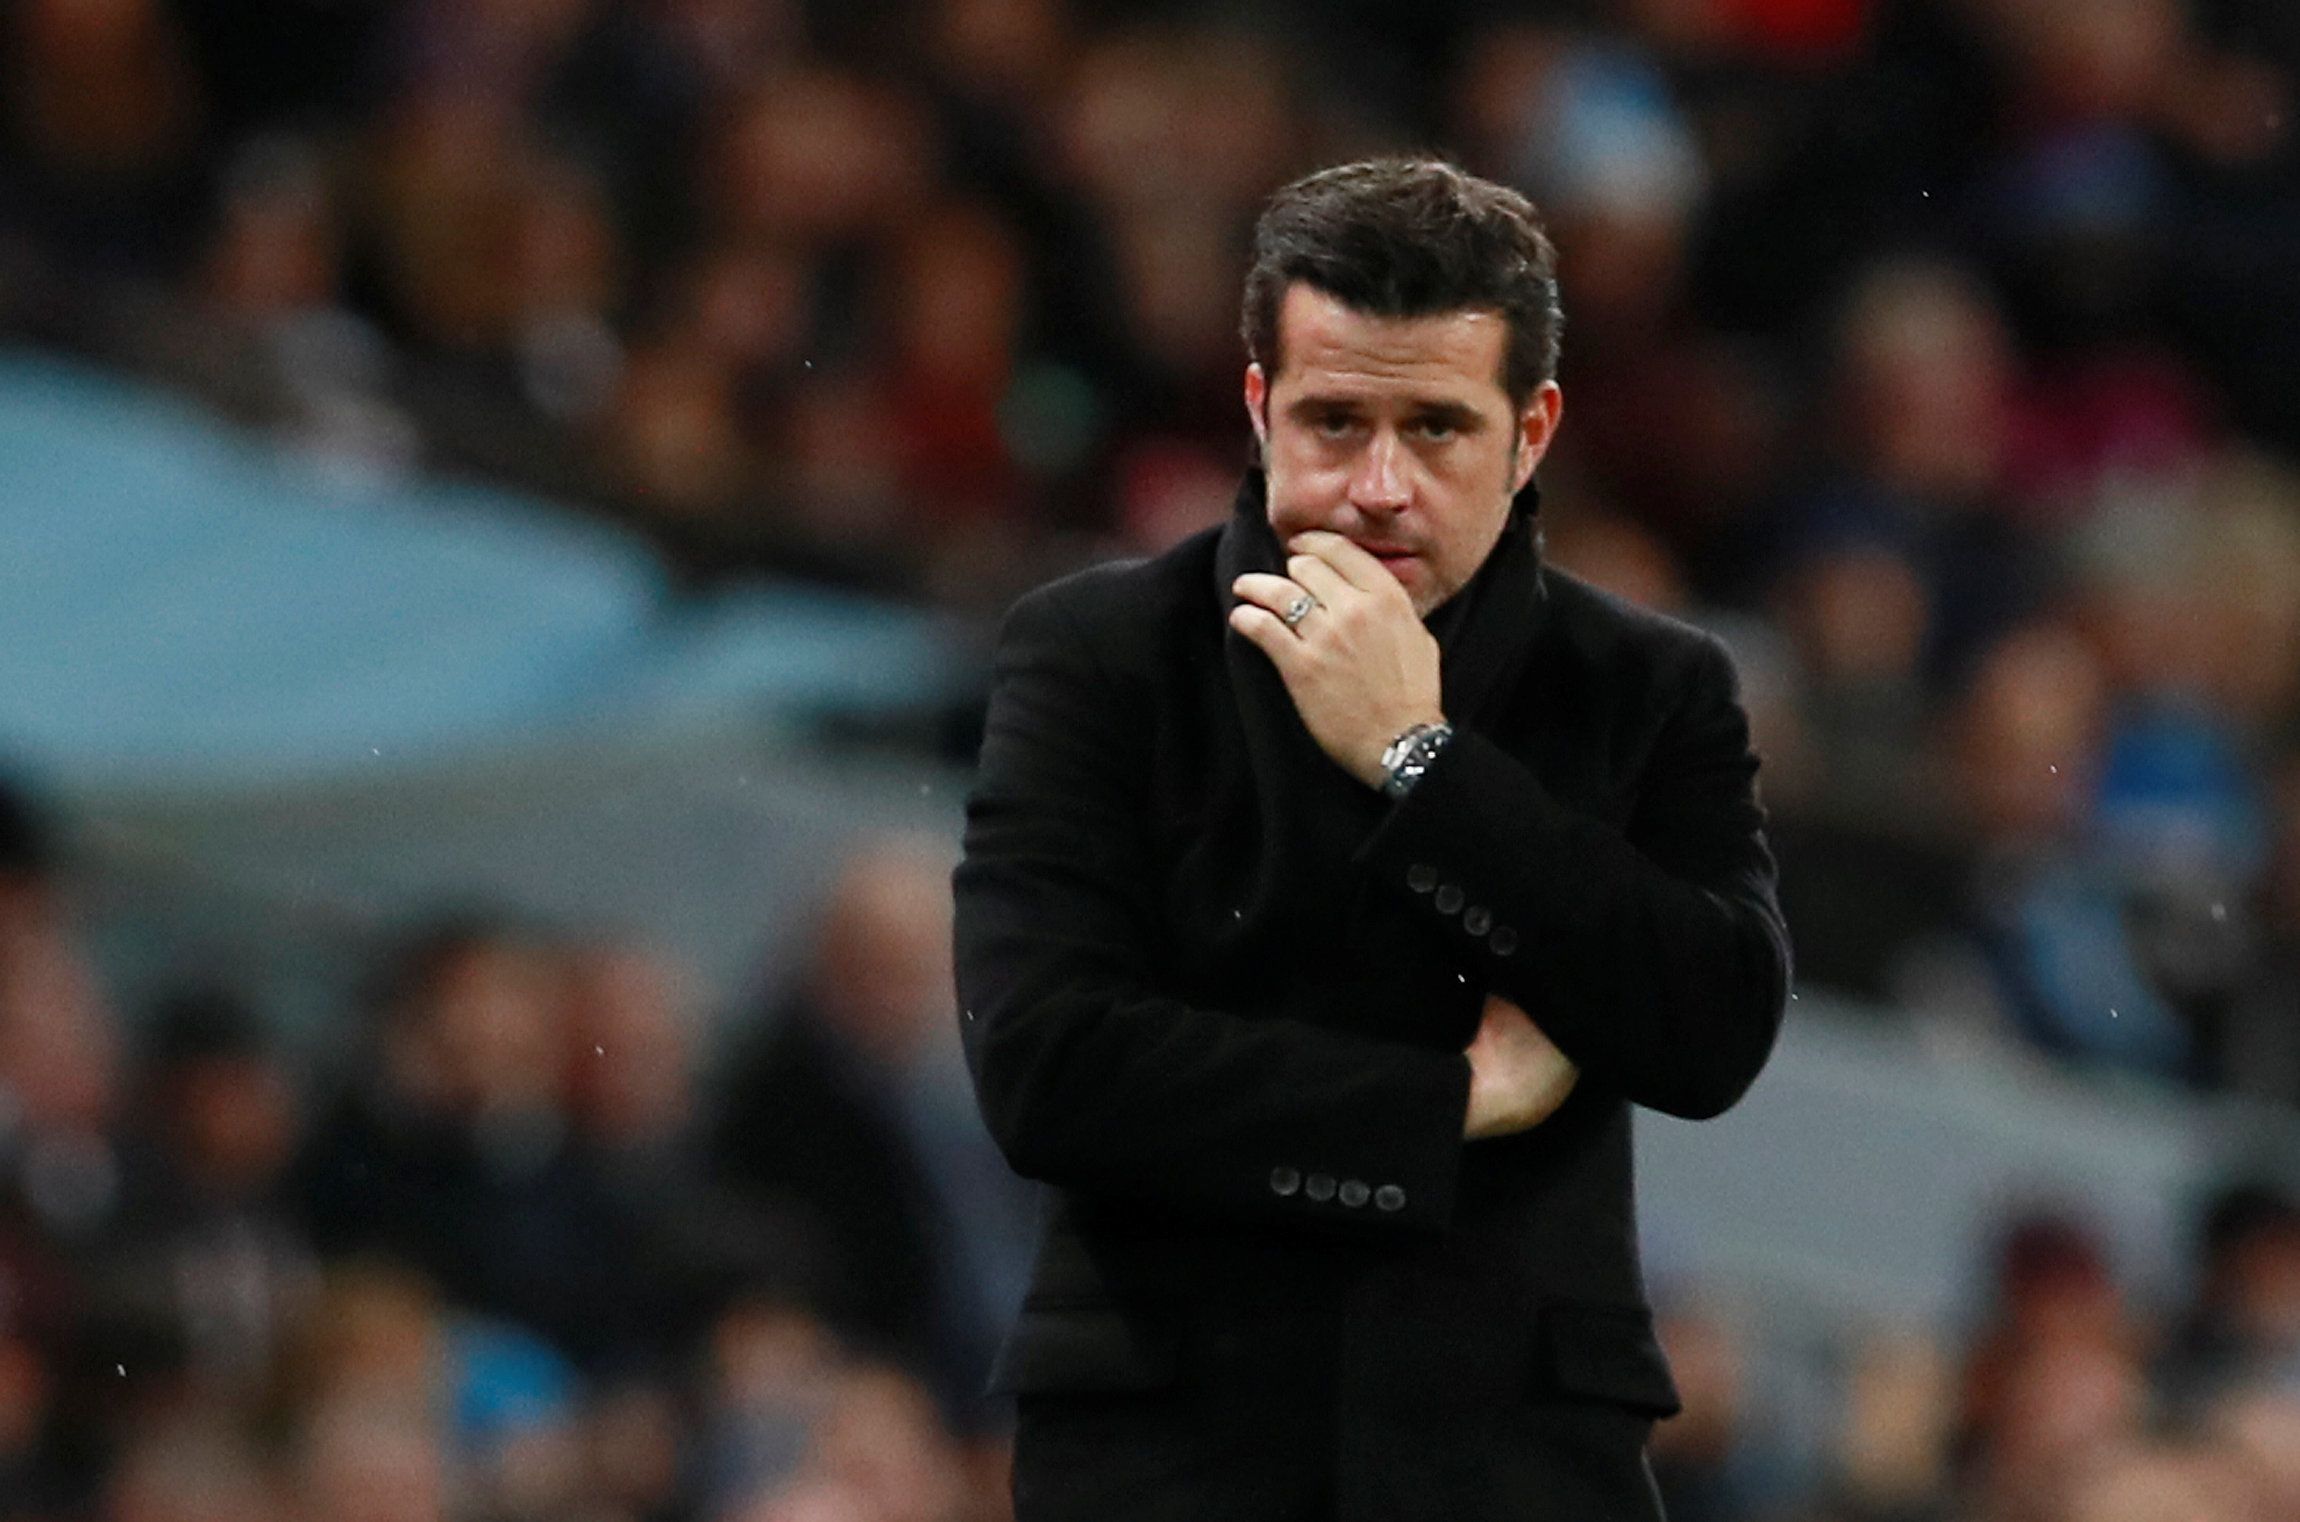 Soccer Football - Premier League - Manchester City vs Watford - Etihad Stadium, Manchester, Britain - January 2, 2018   Watford manager Marco Silva     Action Images via Reuters/Jason Cairnduff    EDITORIAL USE ONLY. No use with unauthorized audio, video, data, fixture lists, club/league logos or "live" services. Online in-match use limited to 75 images, no video emulation. No use in betting, games or single club/league/player publications.  Please contact your account representative for further